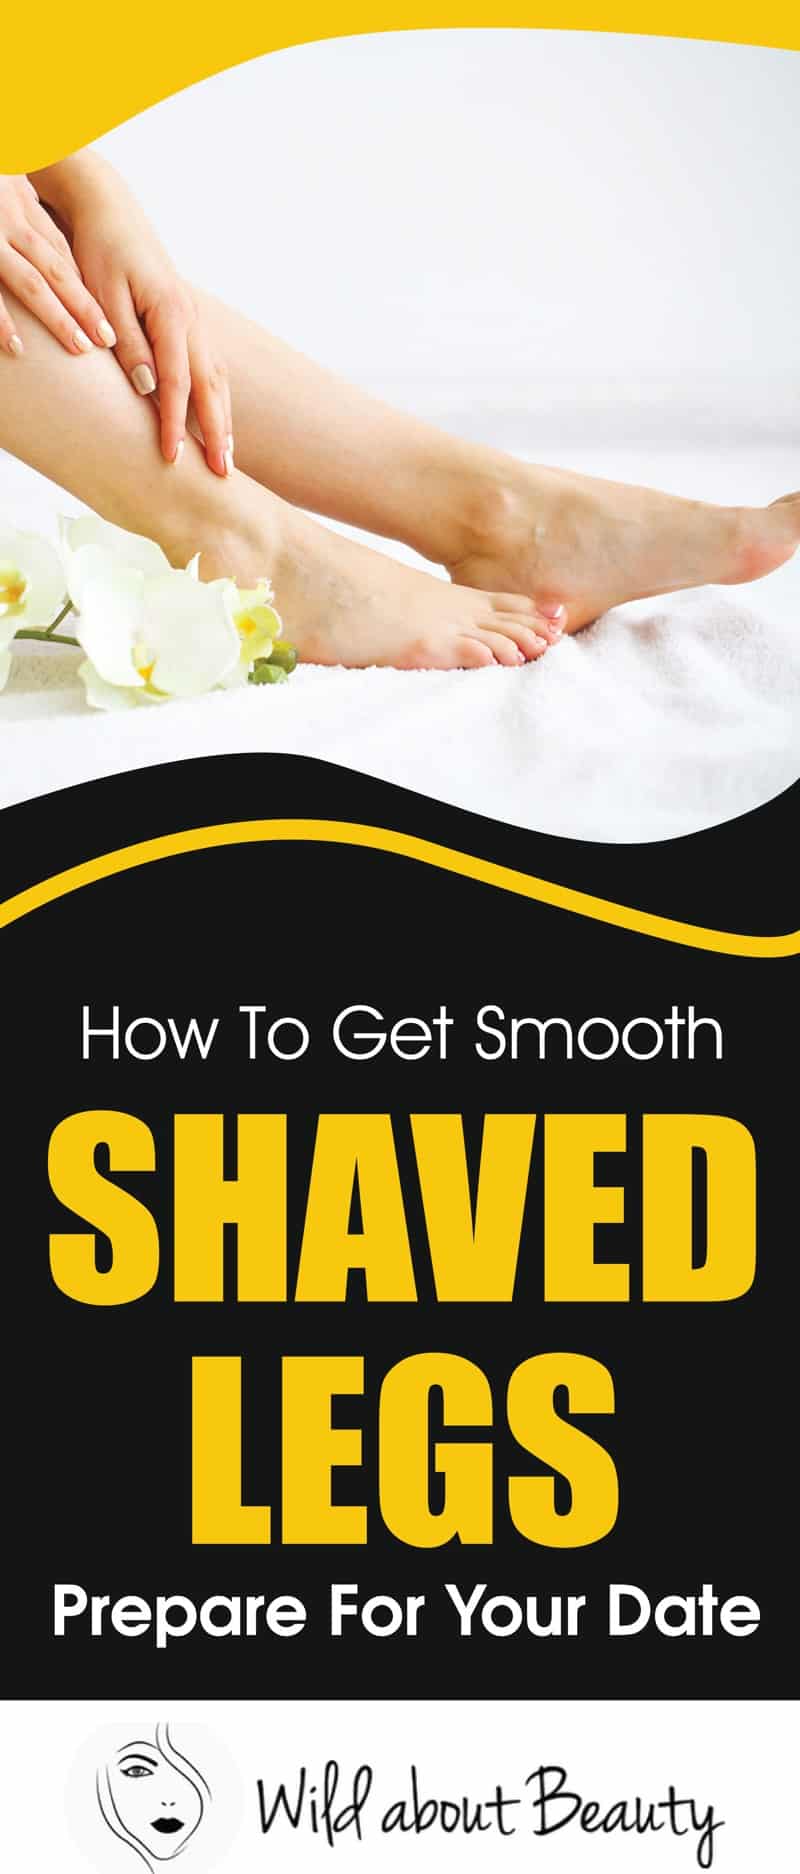 How To Get Smooth Shaved Legs